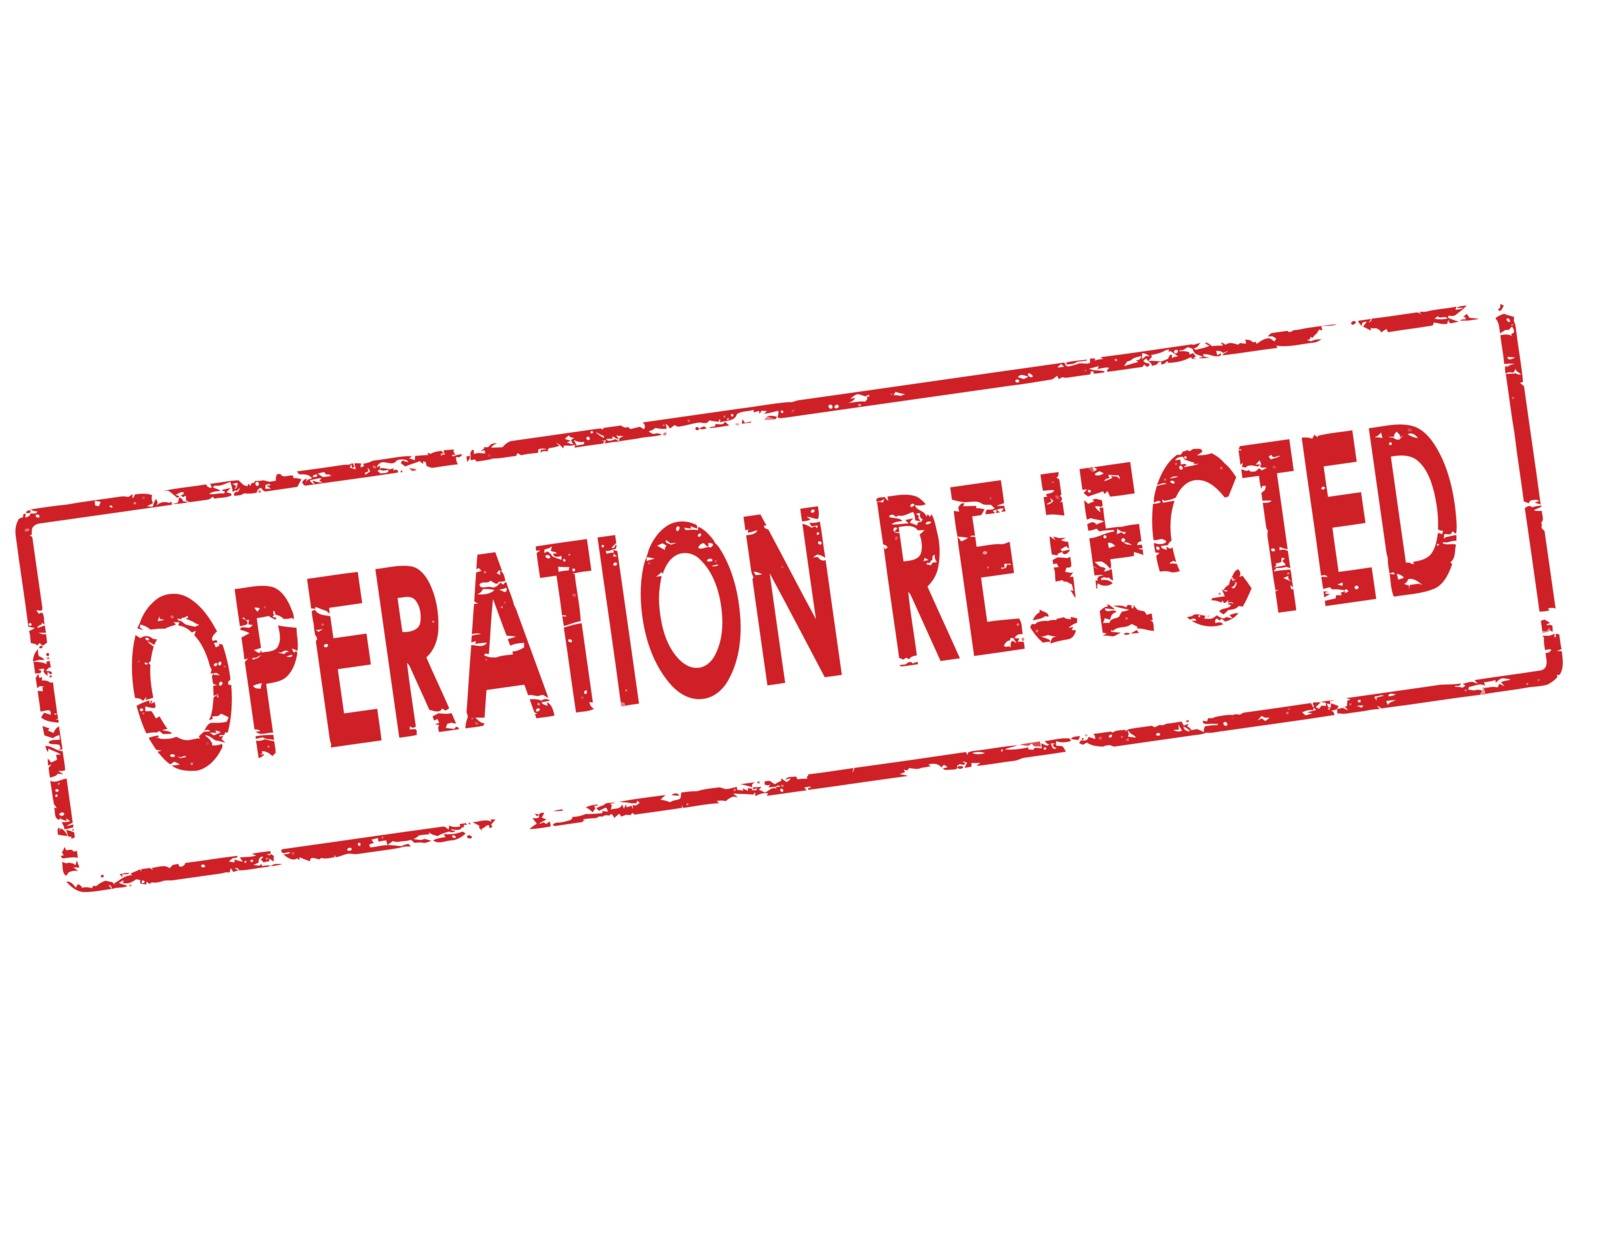 Operation rejected by carmenbobo